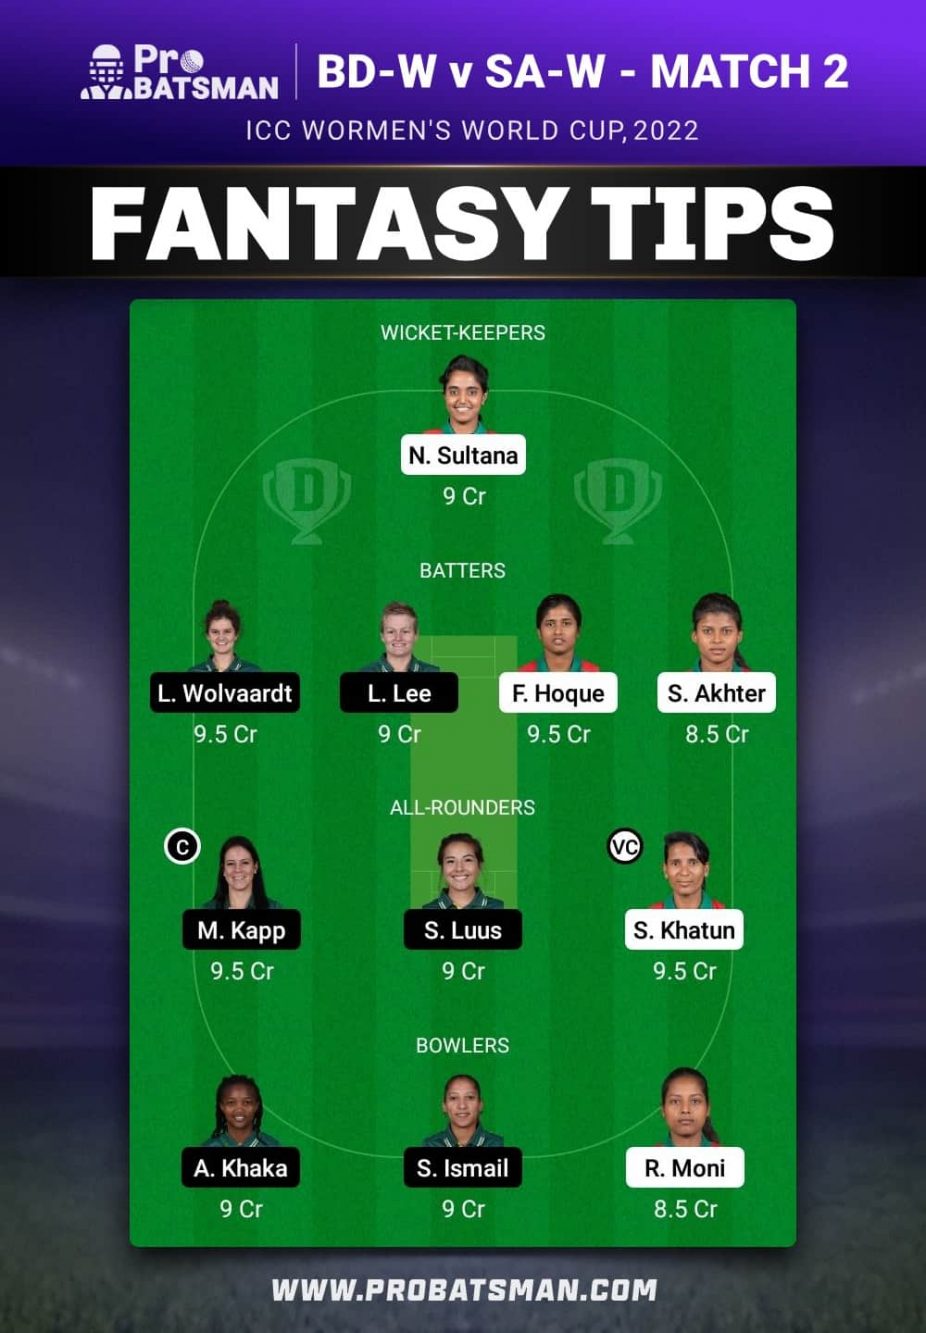 BD-W vs SA-W Dream11 Prediction With Preview, Stats, Pitch Report & Player Record of ICC Women’s World Cup, 2022 For Match 2